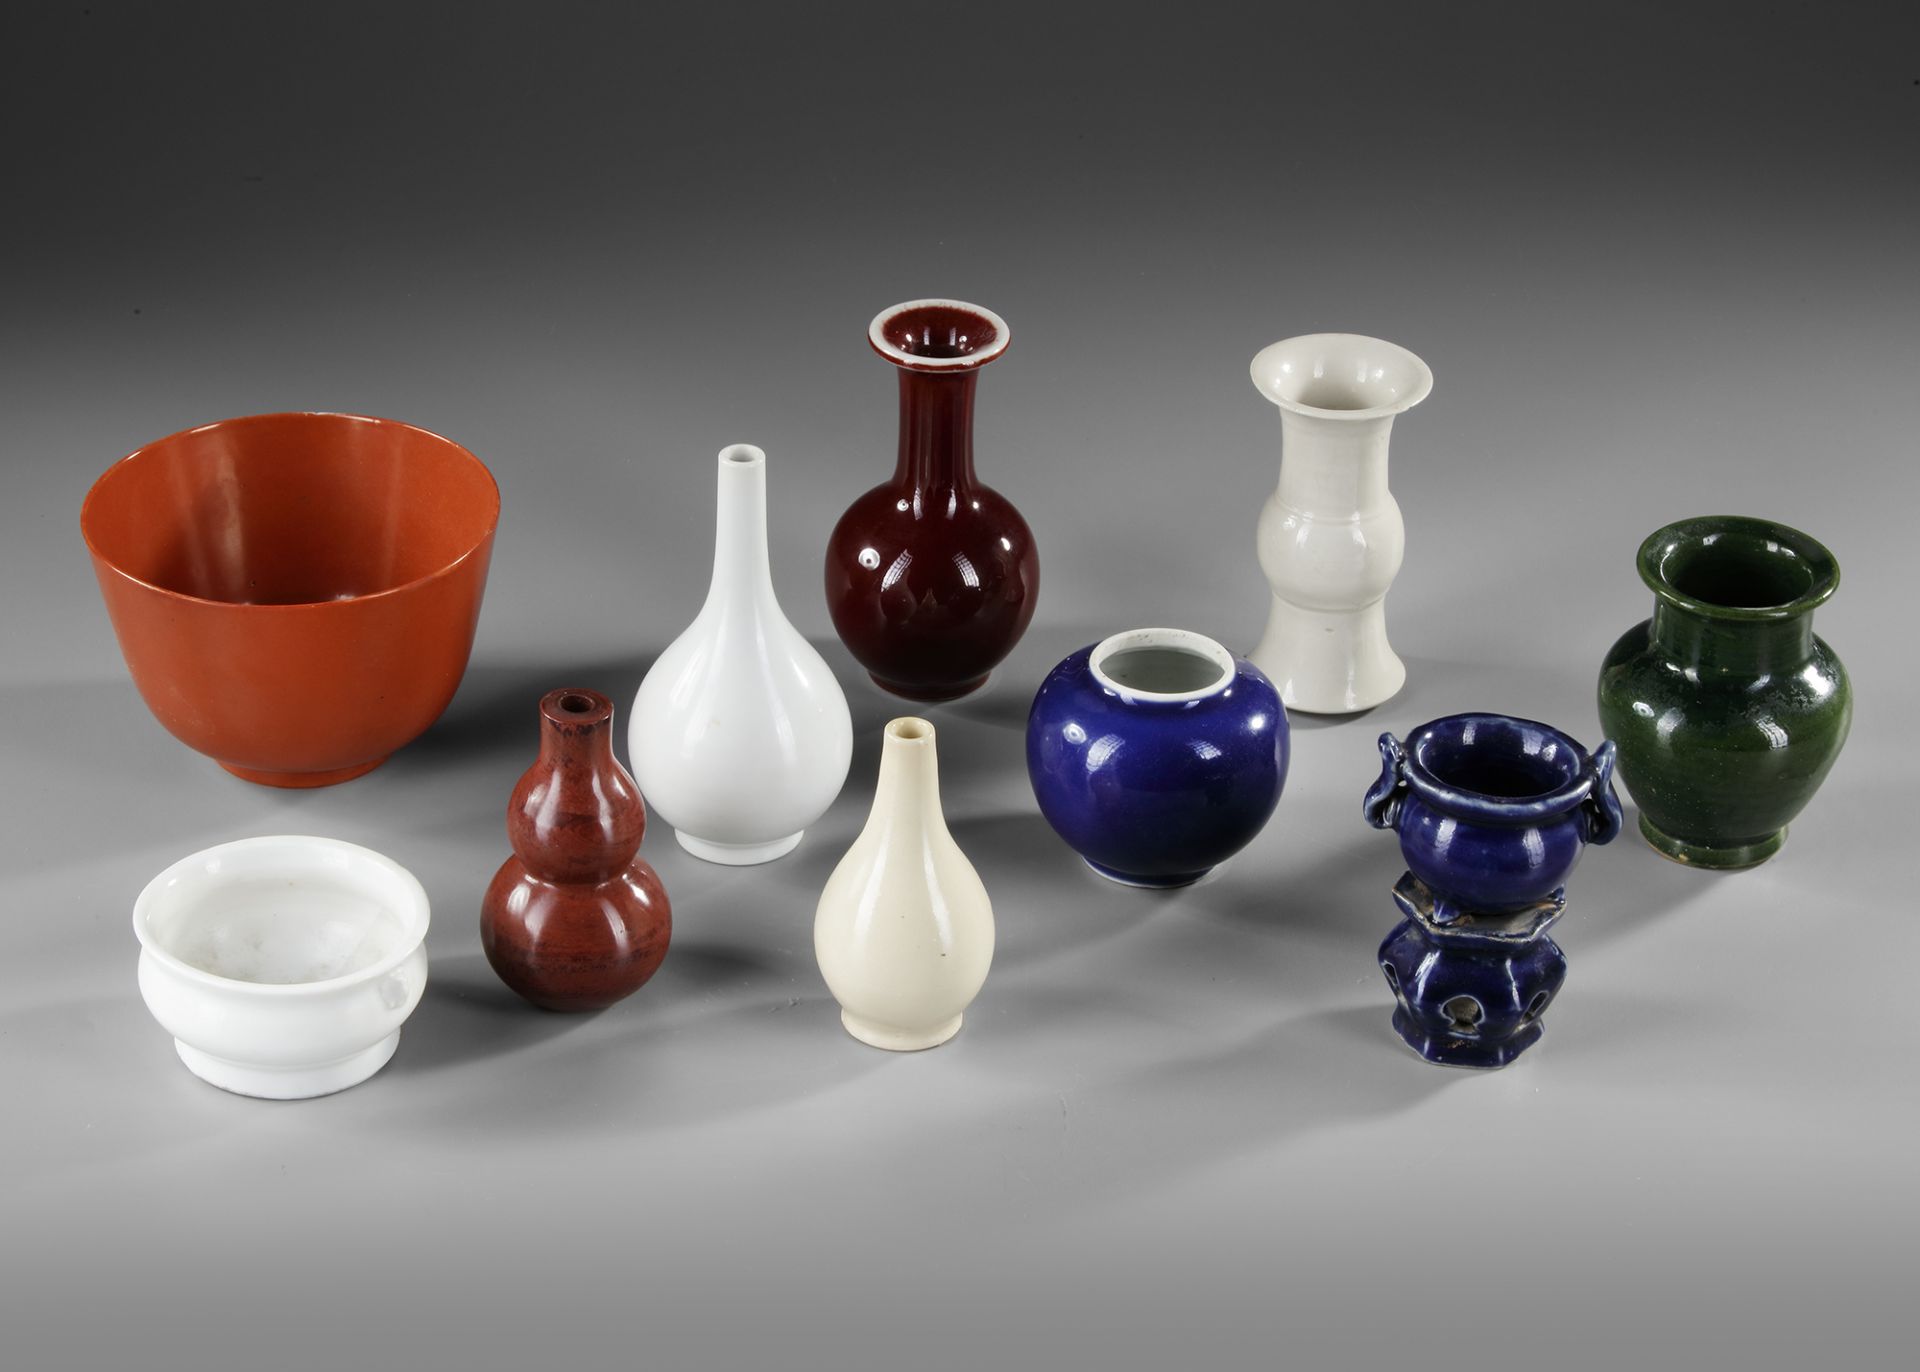 A CHINESE COLLECTION OF 10 MONOCHROME GLAZED PORCELAIN VESSELS, 19TH CENTURY AND LATER